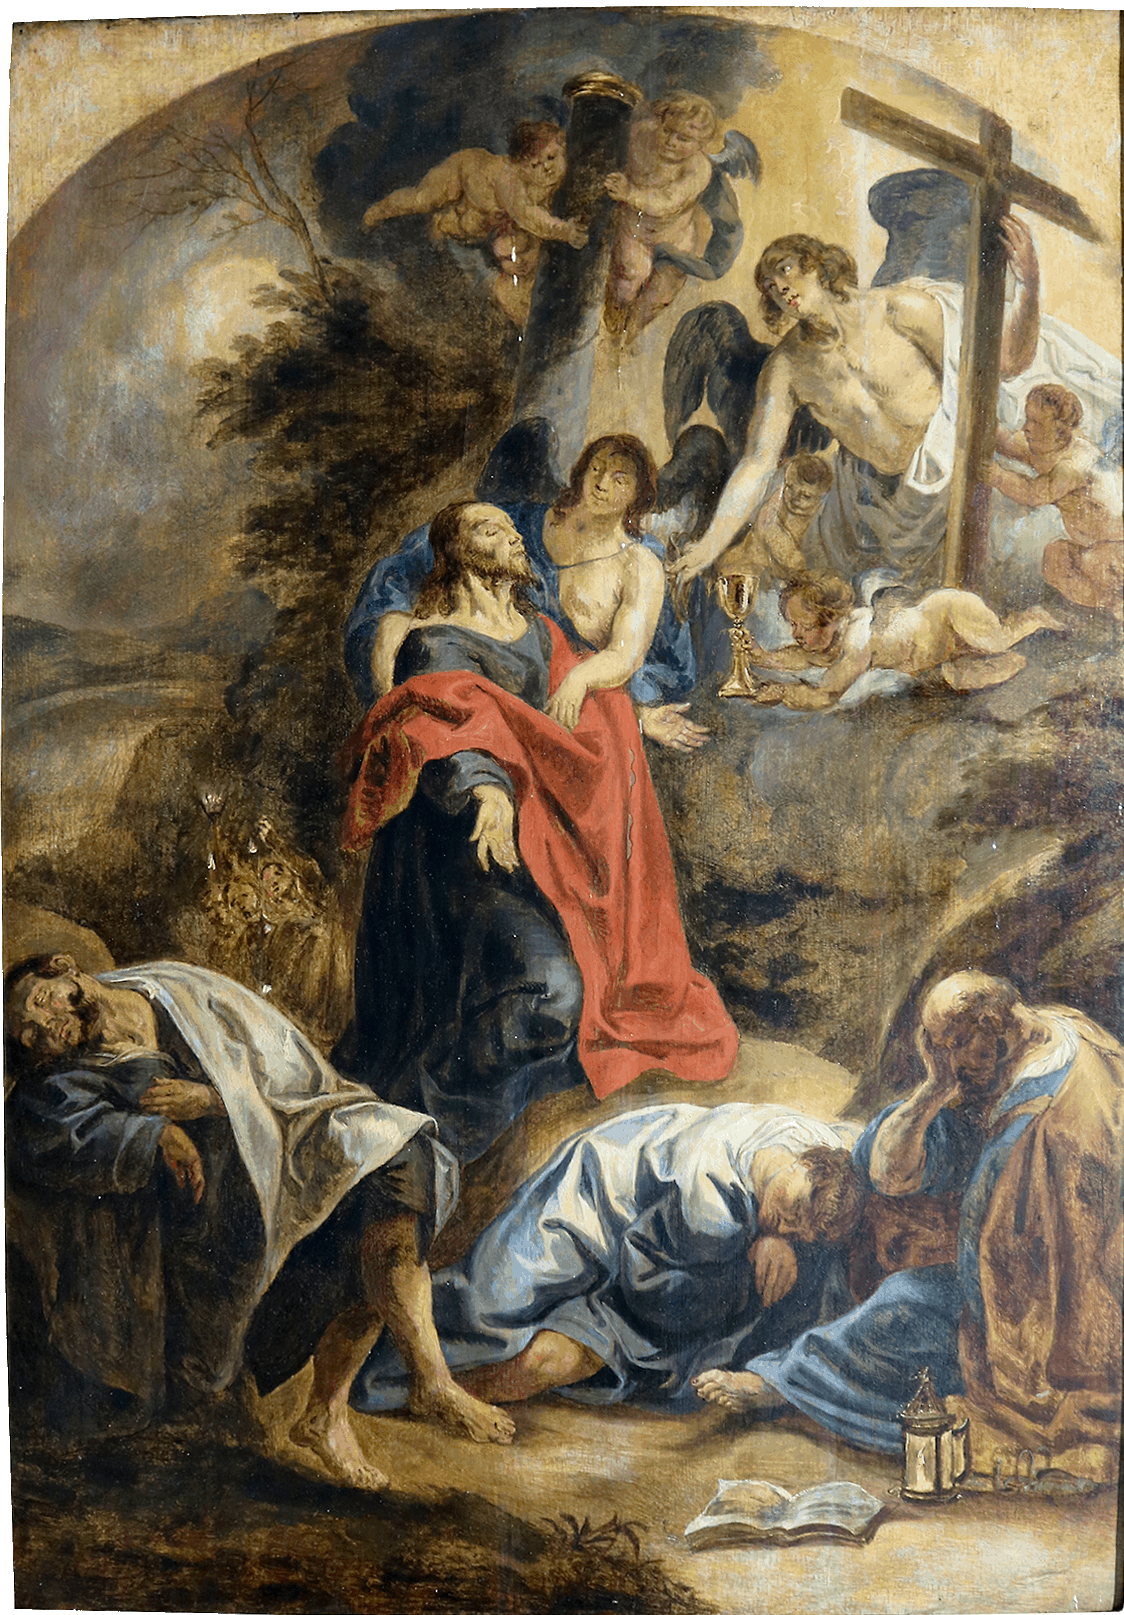 (The Agony of ) Christ in (the Garden of) Gethsemane